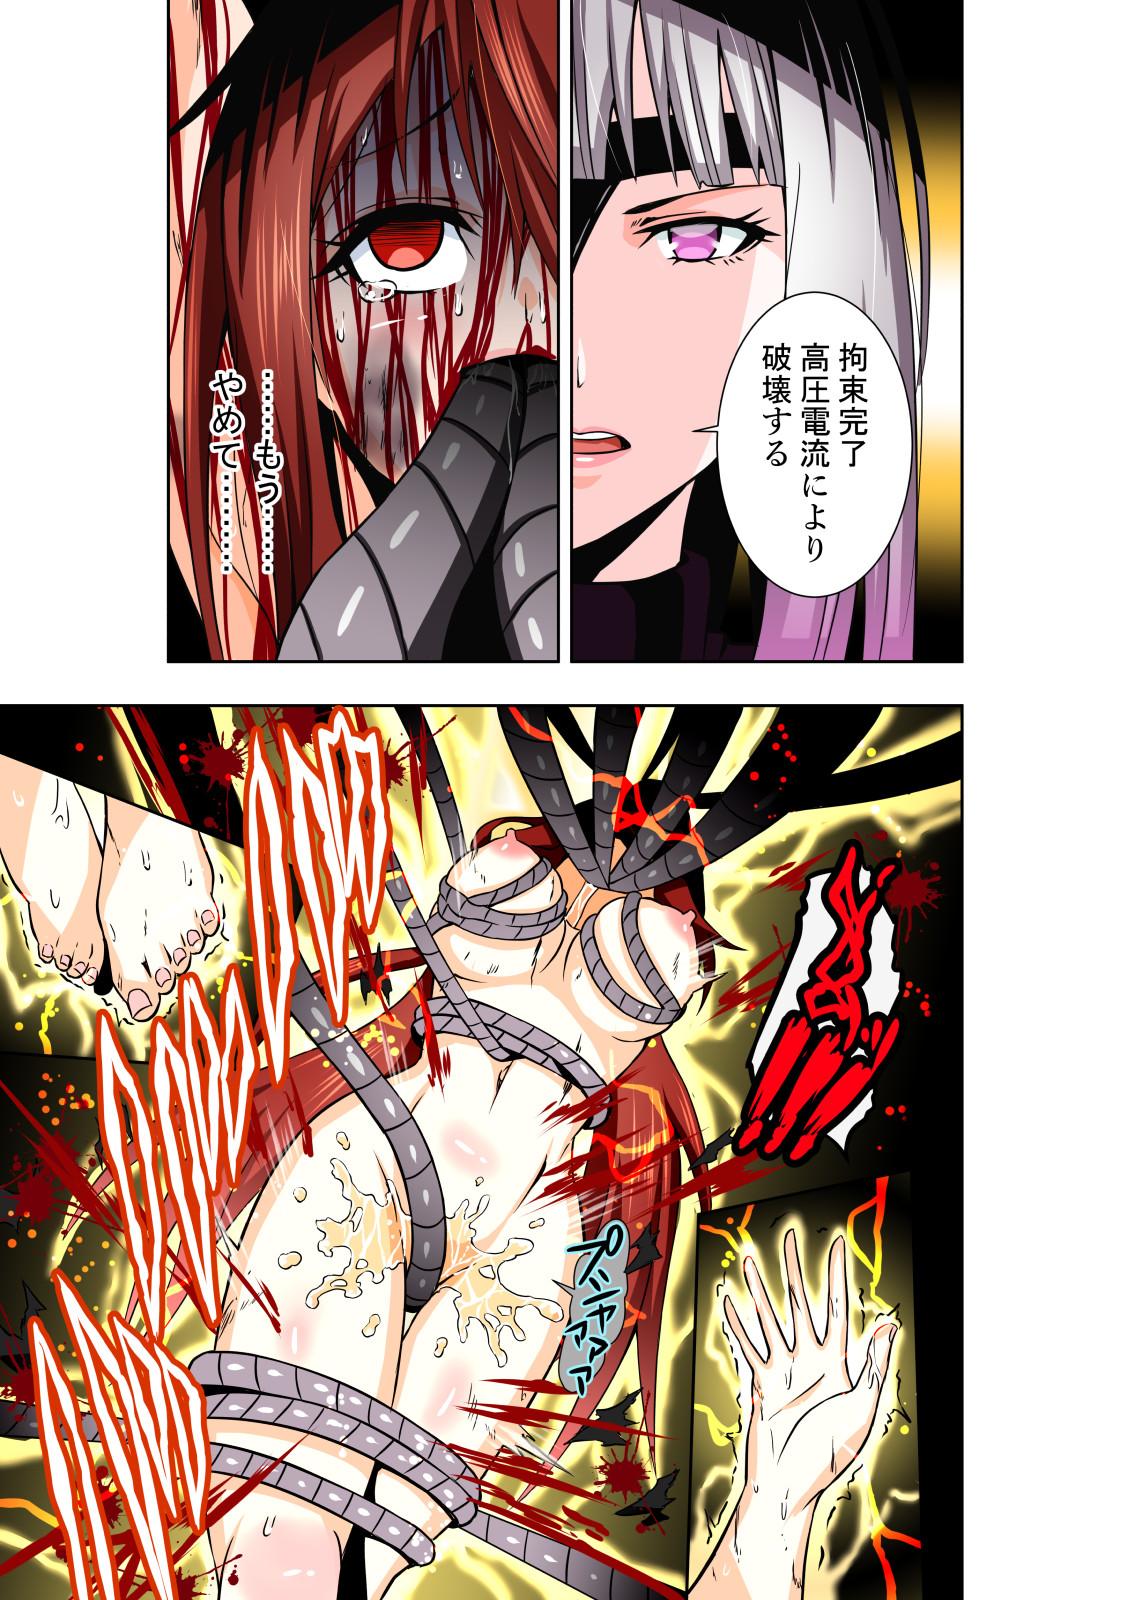 BOUNTY HUNTER GIRL vs LADY ANDROID Ch. 15 17